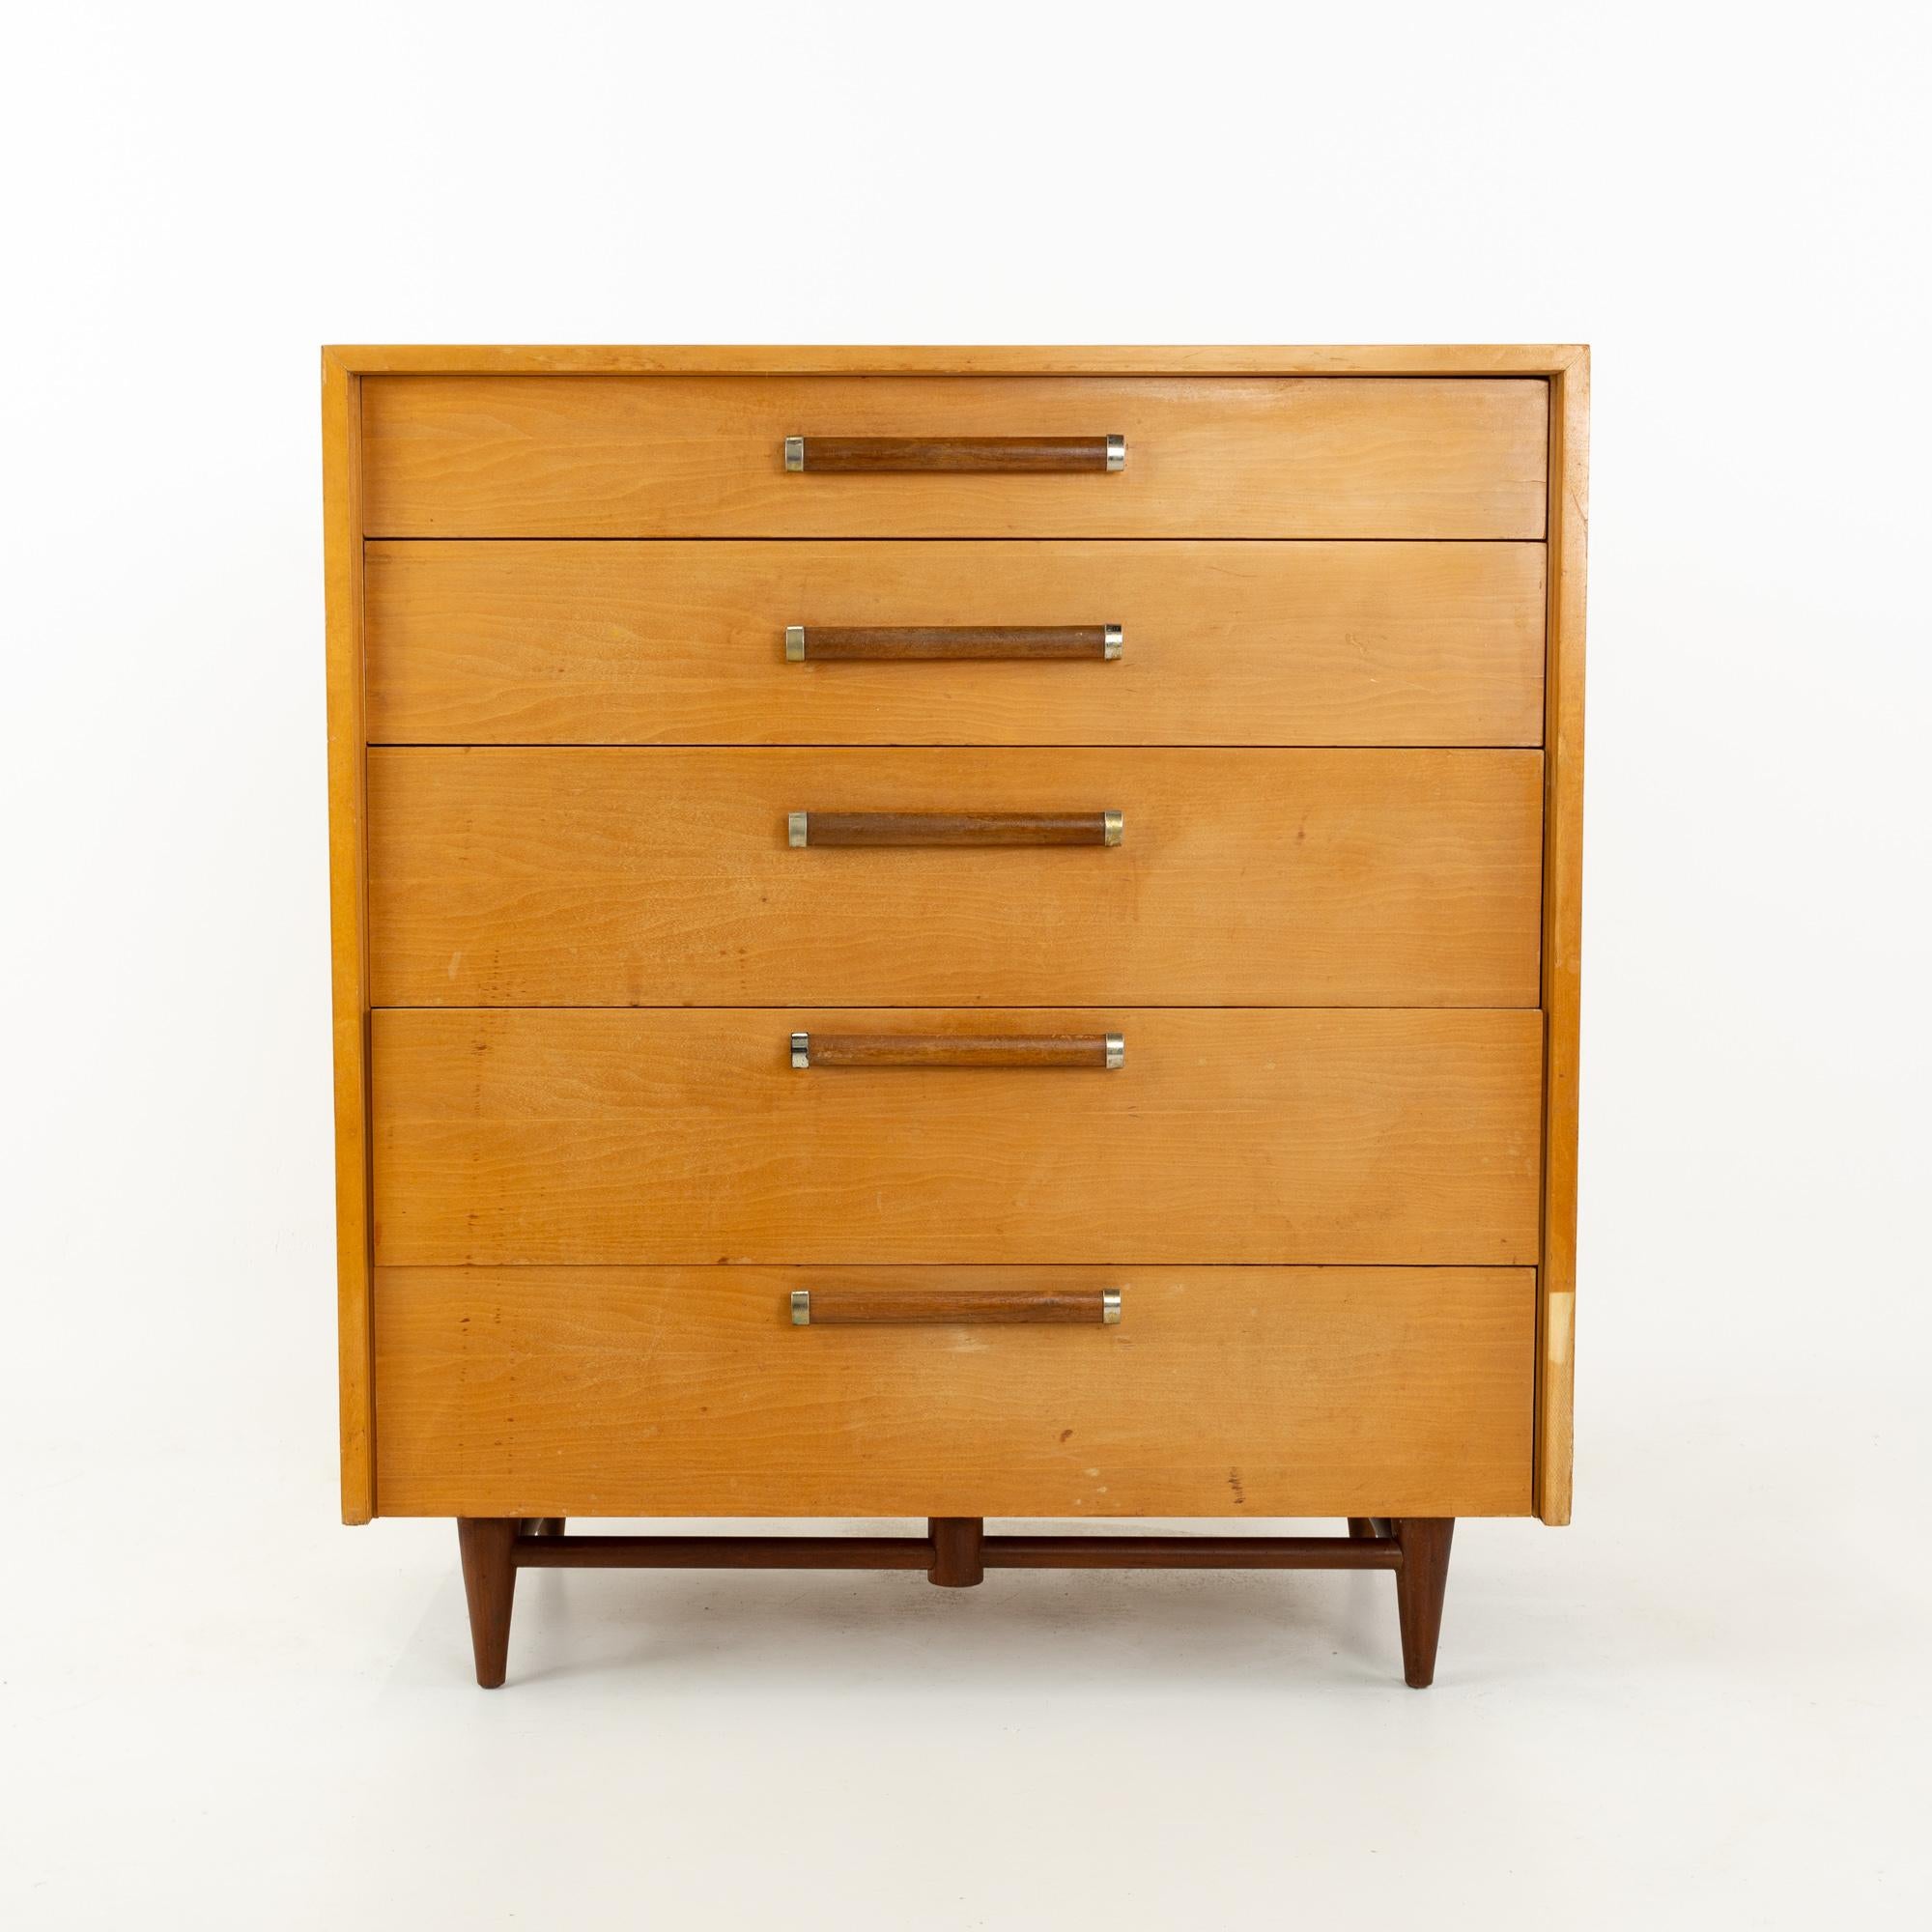 Baughman style Mid Century 5-drawer highboy dresser
This dresser is 38 wide x 19.25 deep x 42 inches high

This price includes getting this piece in what we call restored vintage condition. That means the piece is permanently fixed upon purchase so